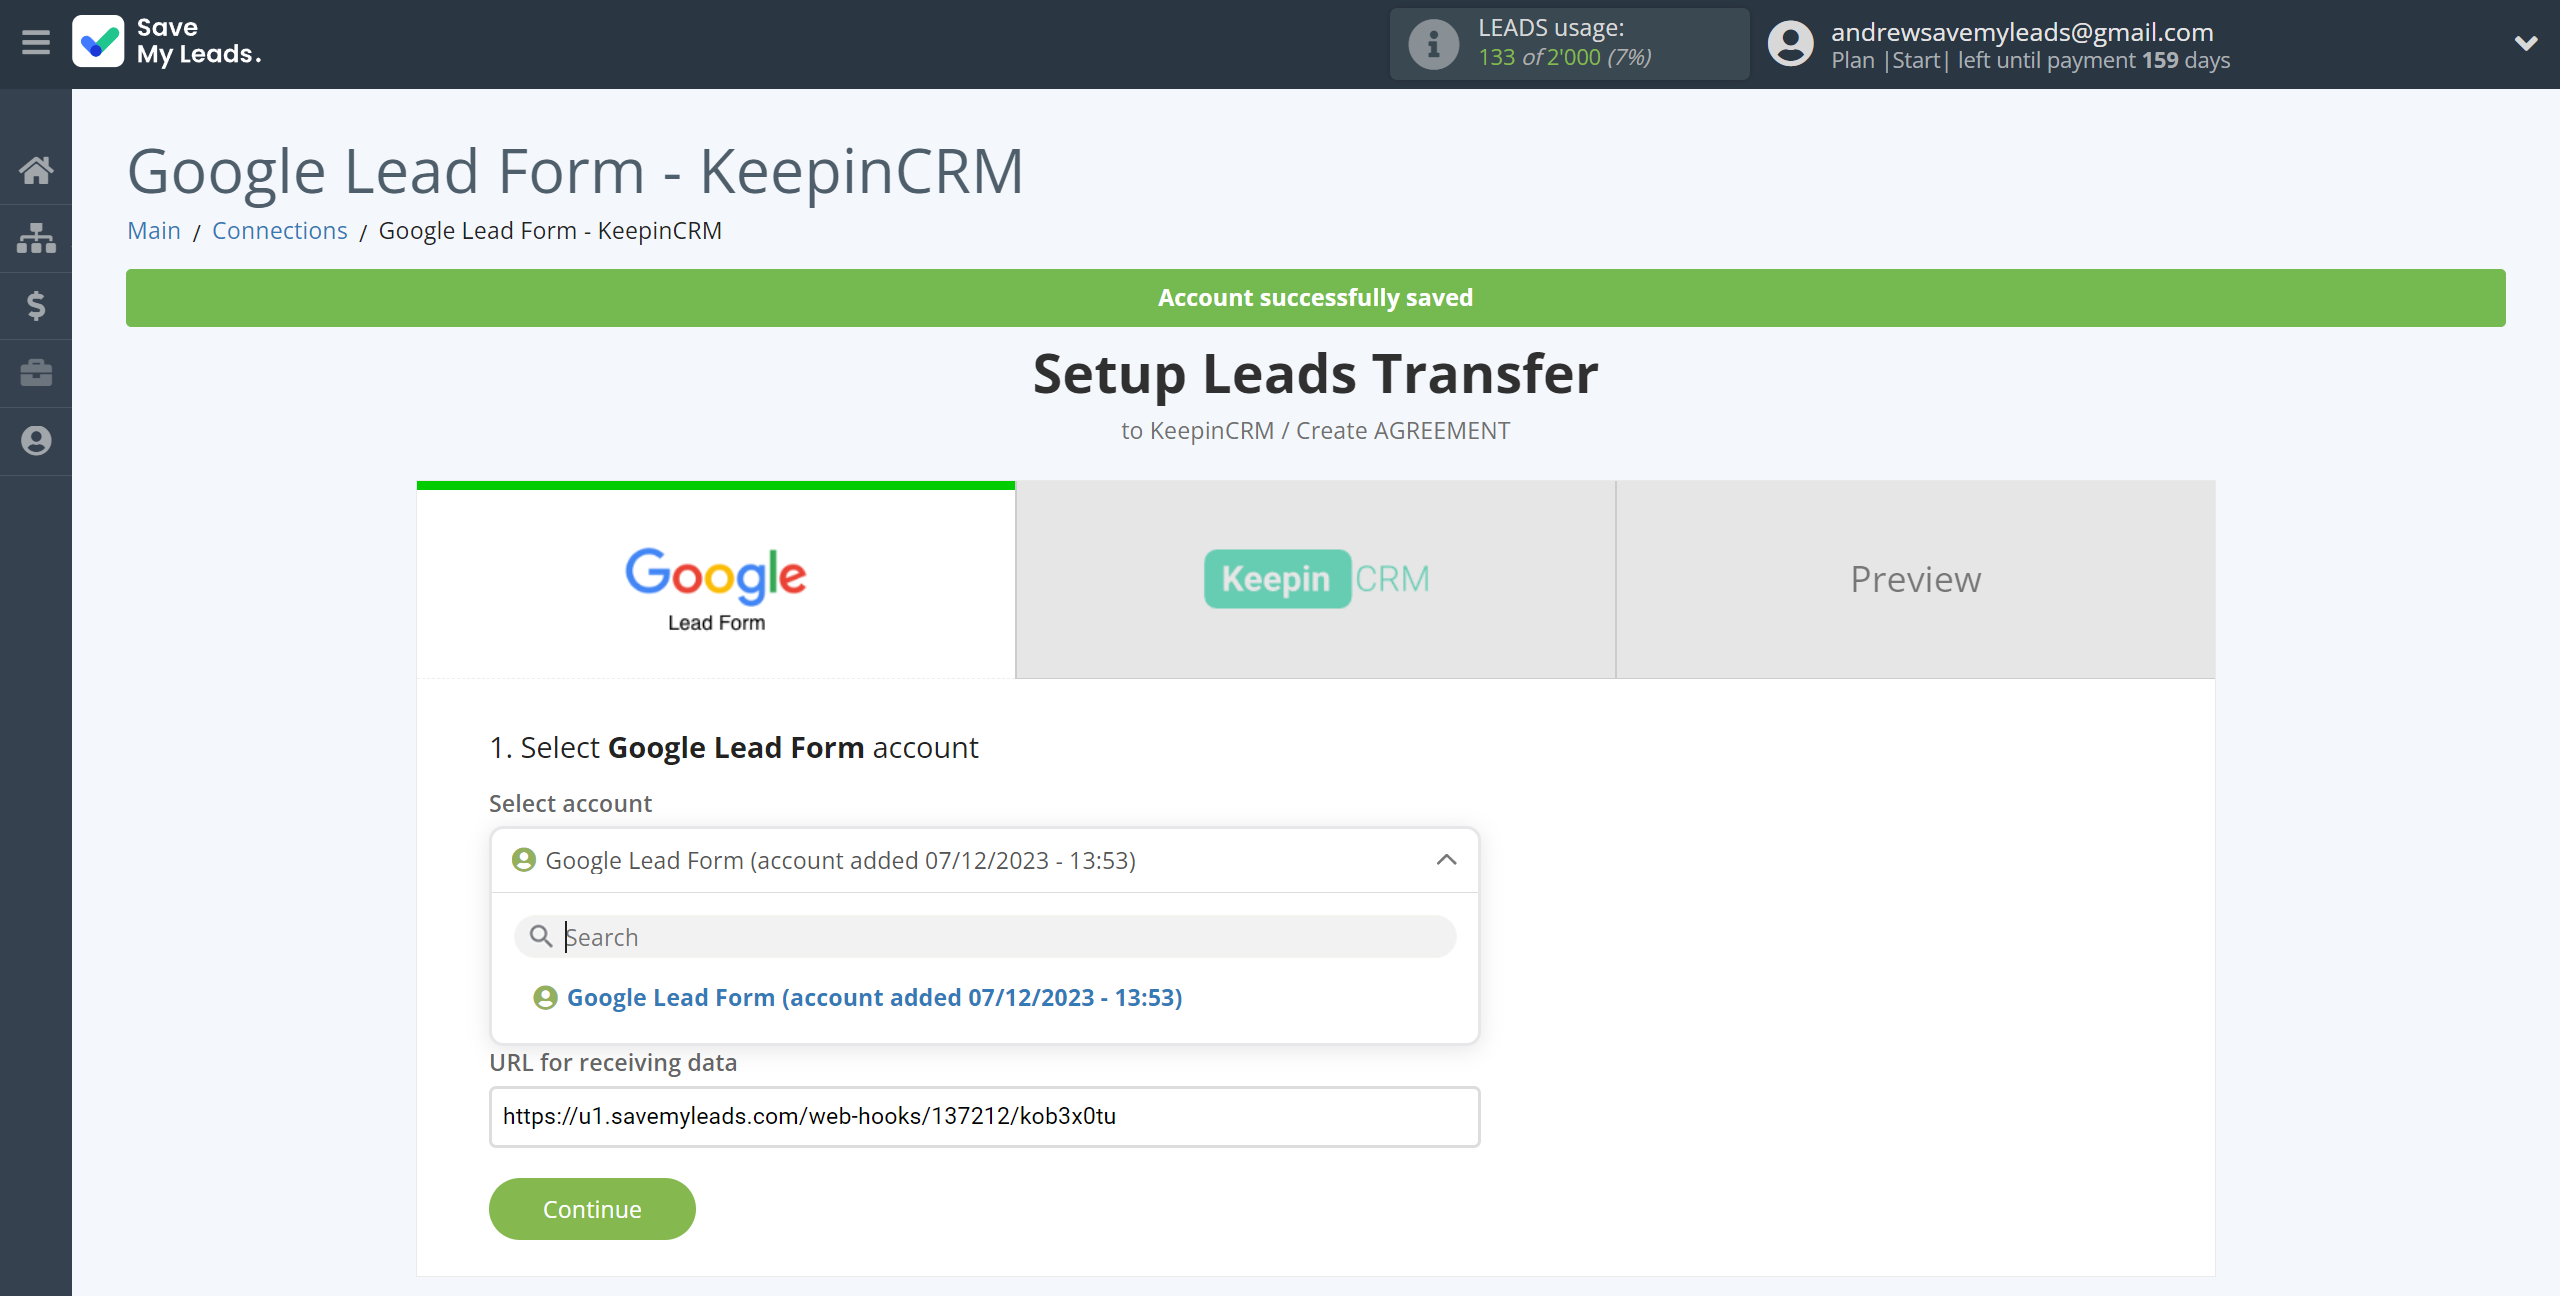 How to Connect Google Lead Form with KeepinCRM Create Agreement | Data Source account selection